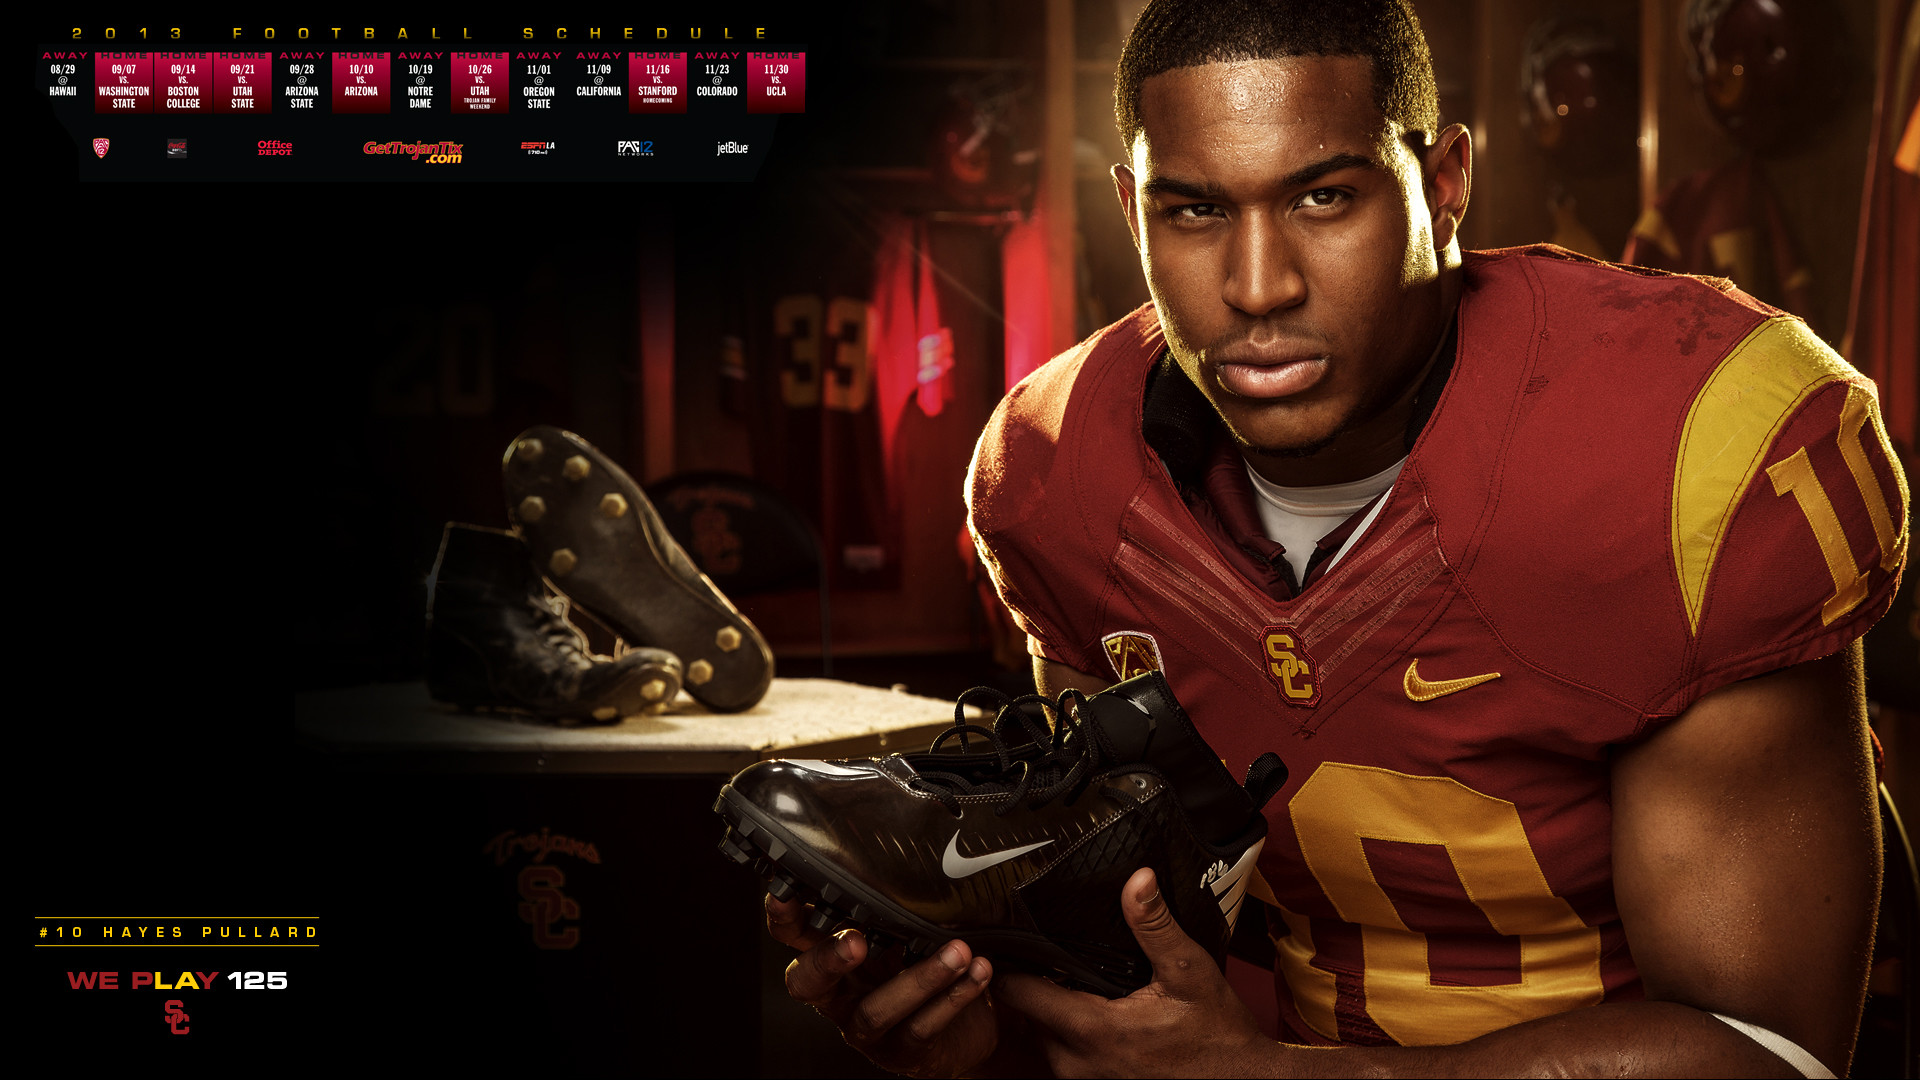 1920x1080 ... Usc Trojans Football Wallpaper 2013 - All The Gallery You Need!